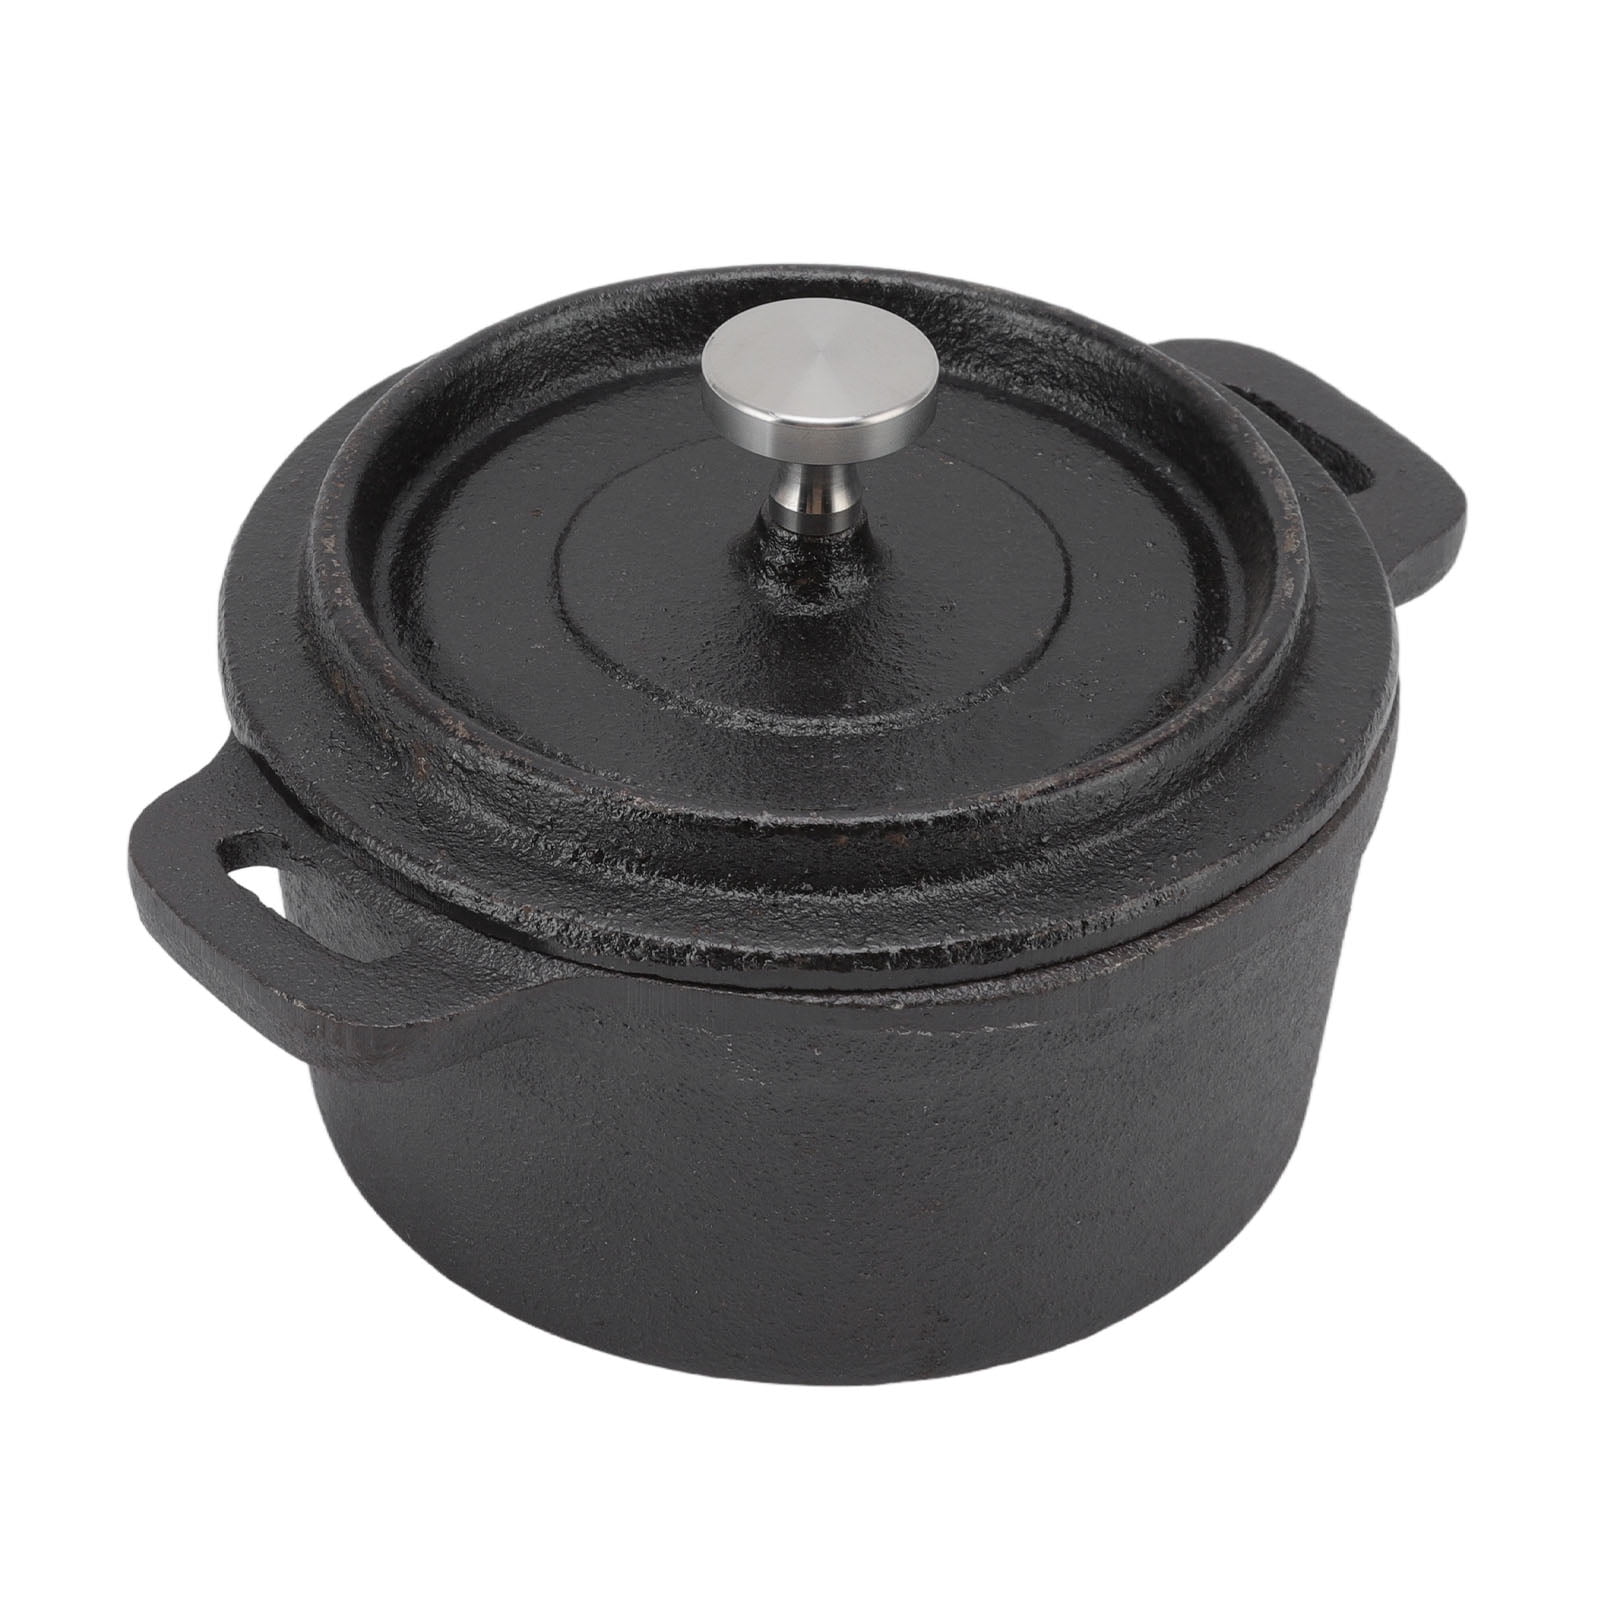 Octpeak Pot Accessories,19.5cm Dutch Oven Lid Lifter Cast Iron Dutch Oven Lid Lifter with Spiral Handle for Outdoor Camping Hiking,Lid Lifter for